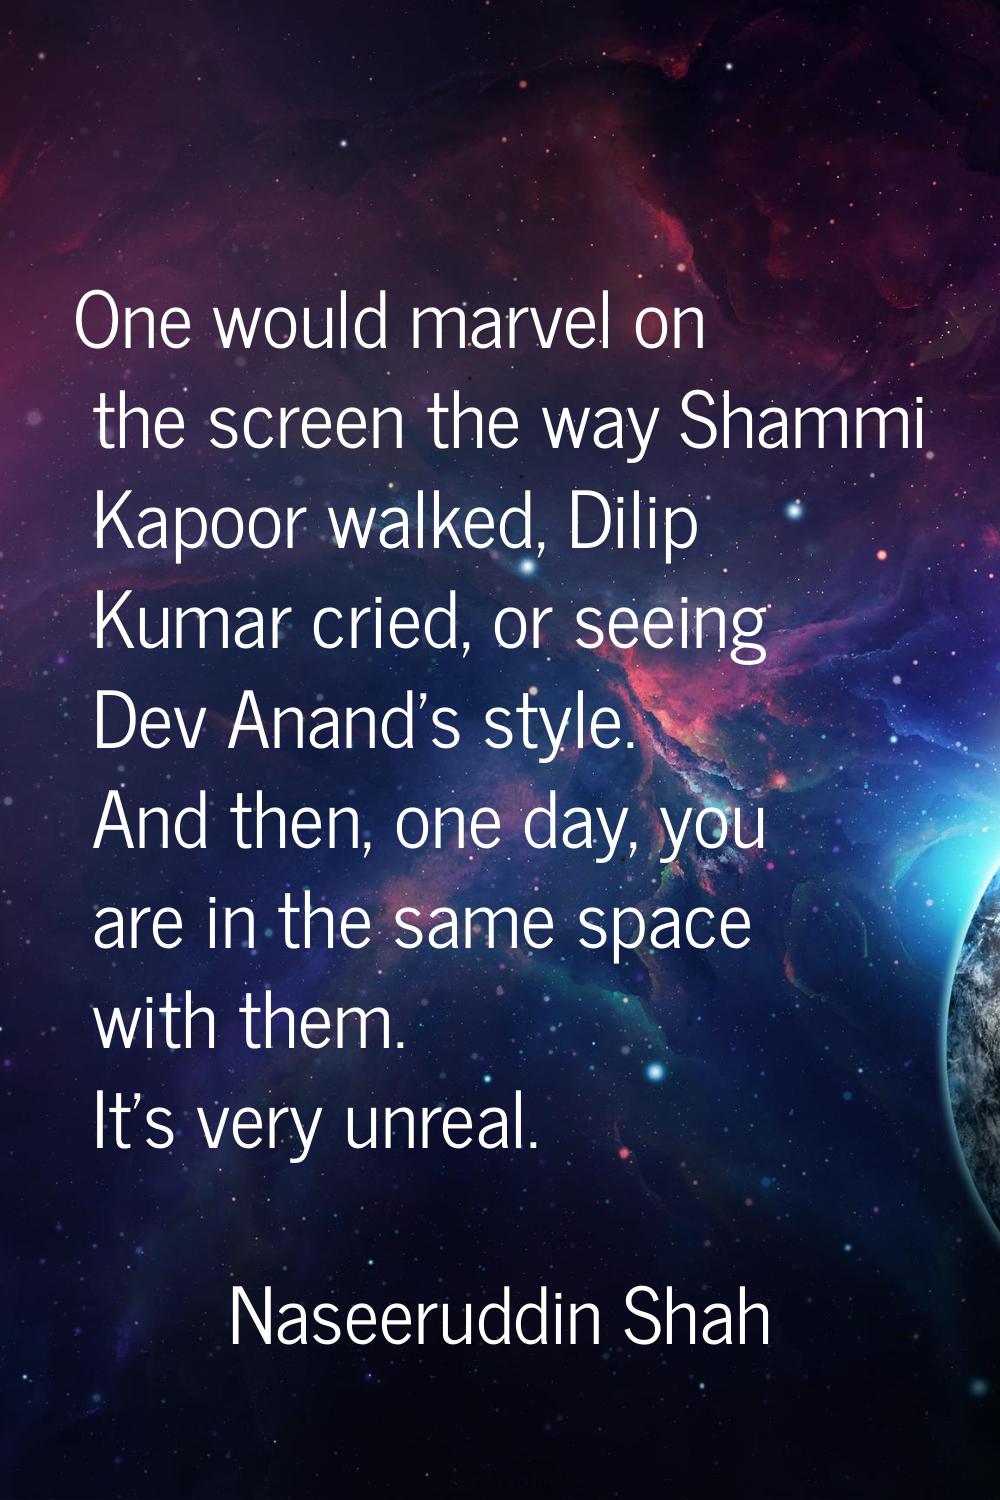 One would marvel on the screen the way Shammi Kapoor walked, Dilip Kumar cried, or seeing Dev Anand